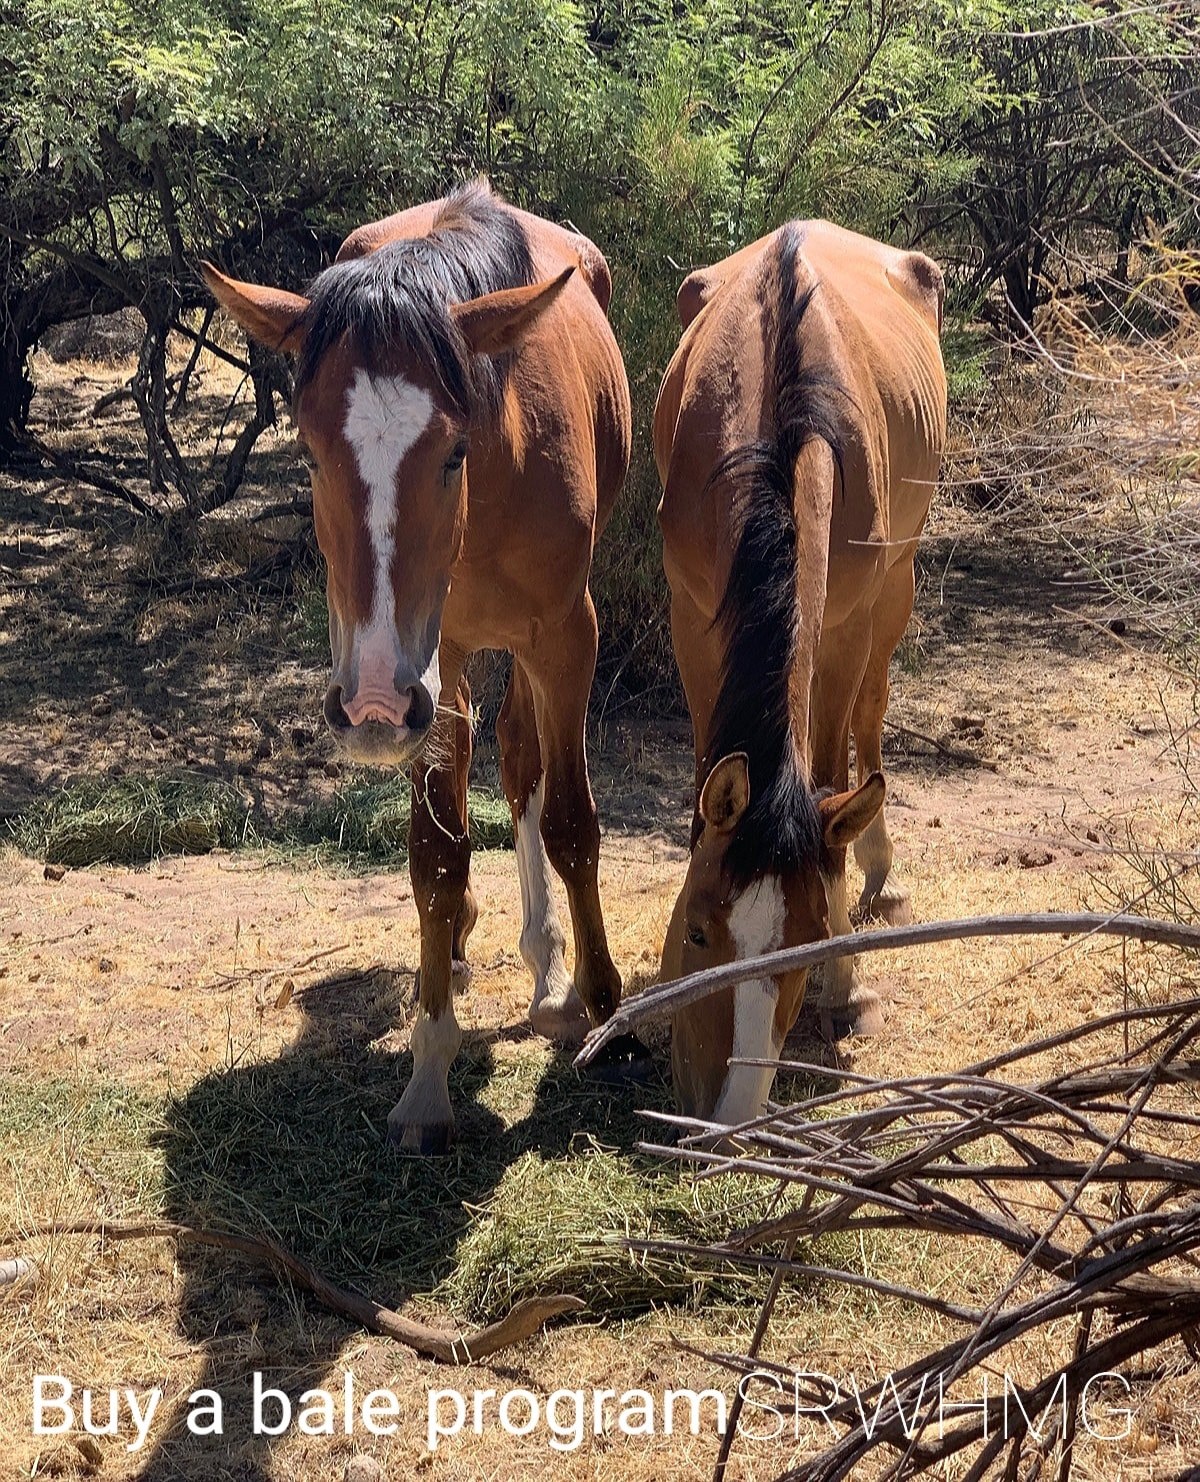 Please support the Salt River River wild horses through thick and through thin!